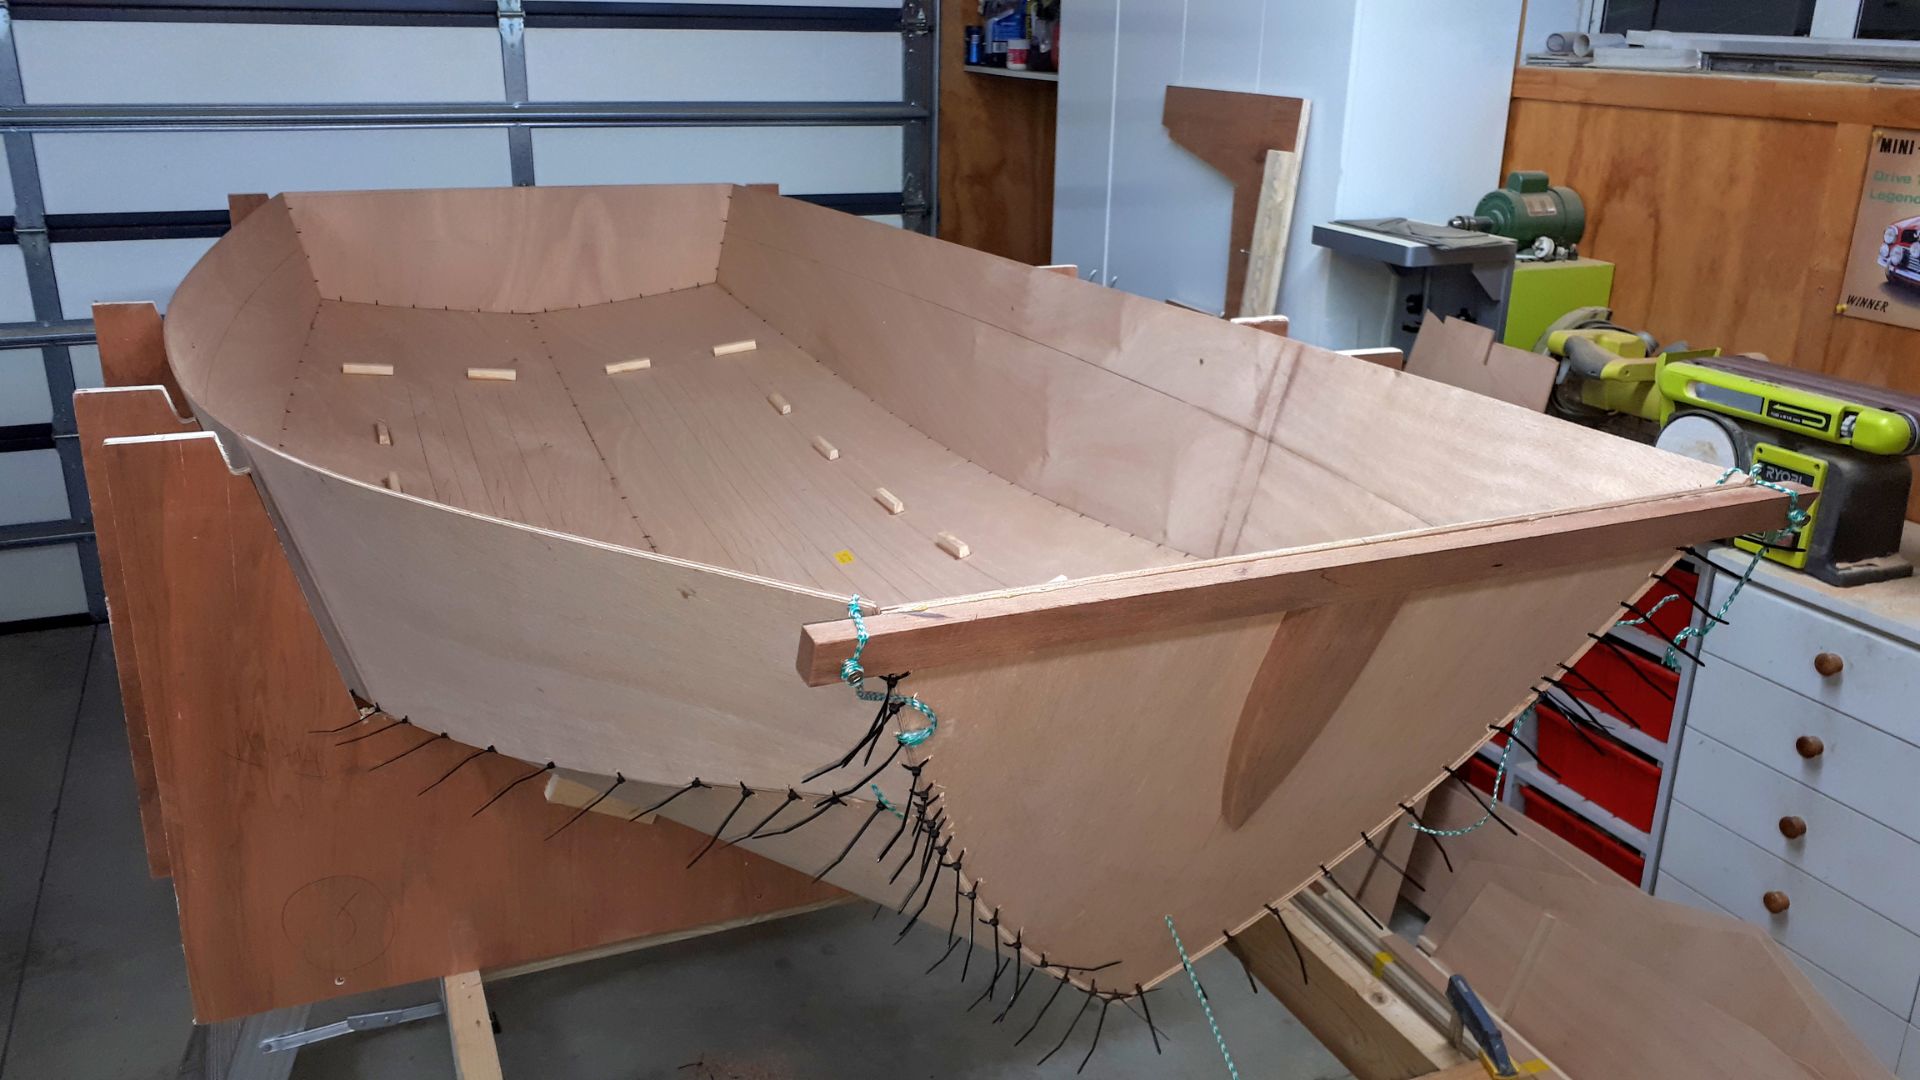 A partly built Mirror dinghy wooden kit being built in a well equipped garage